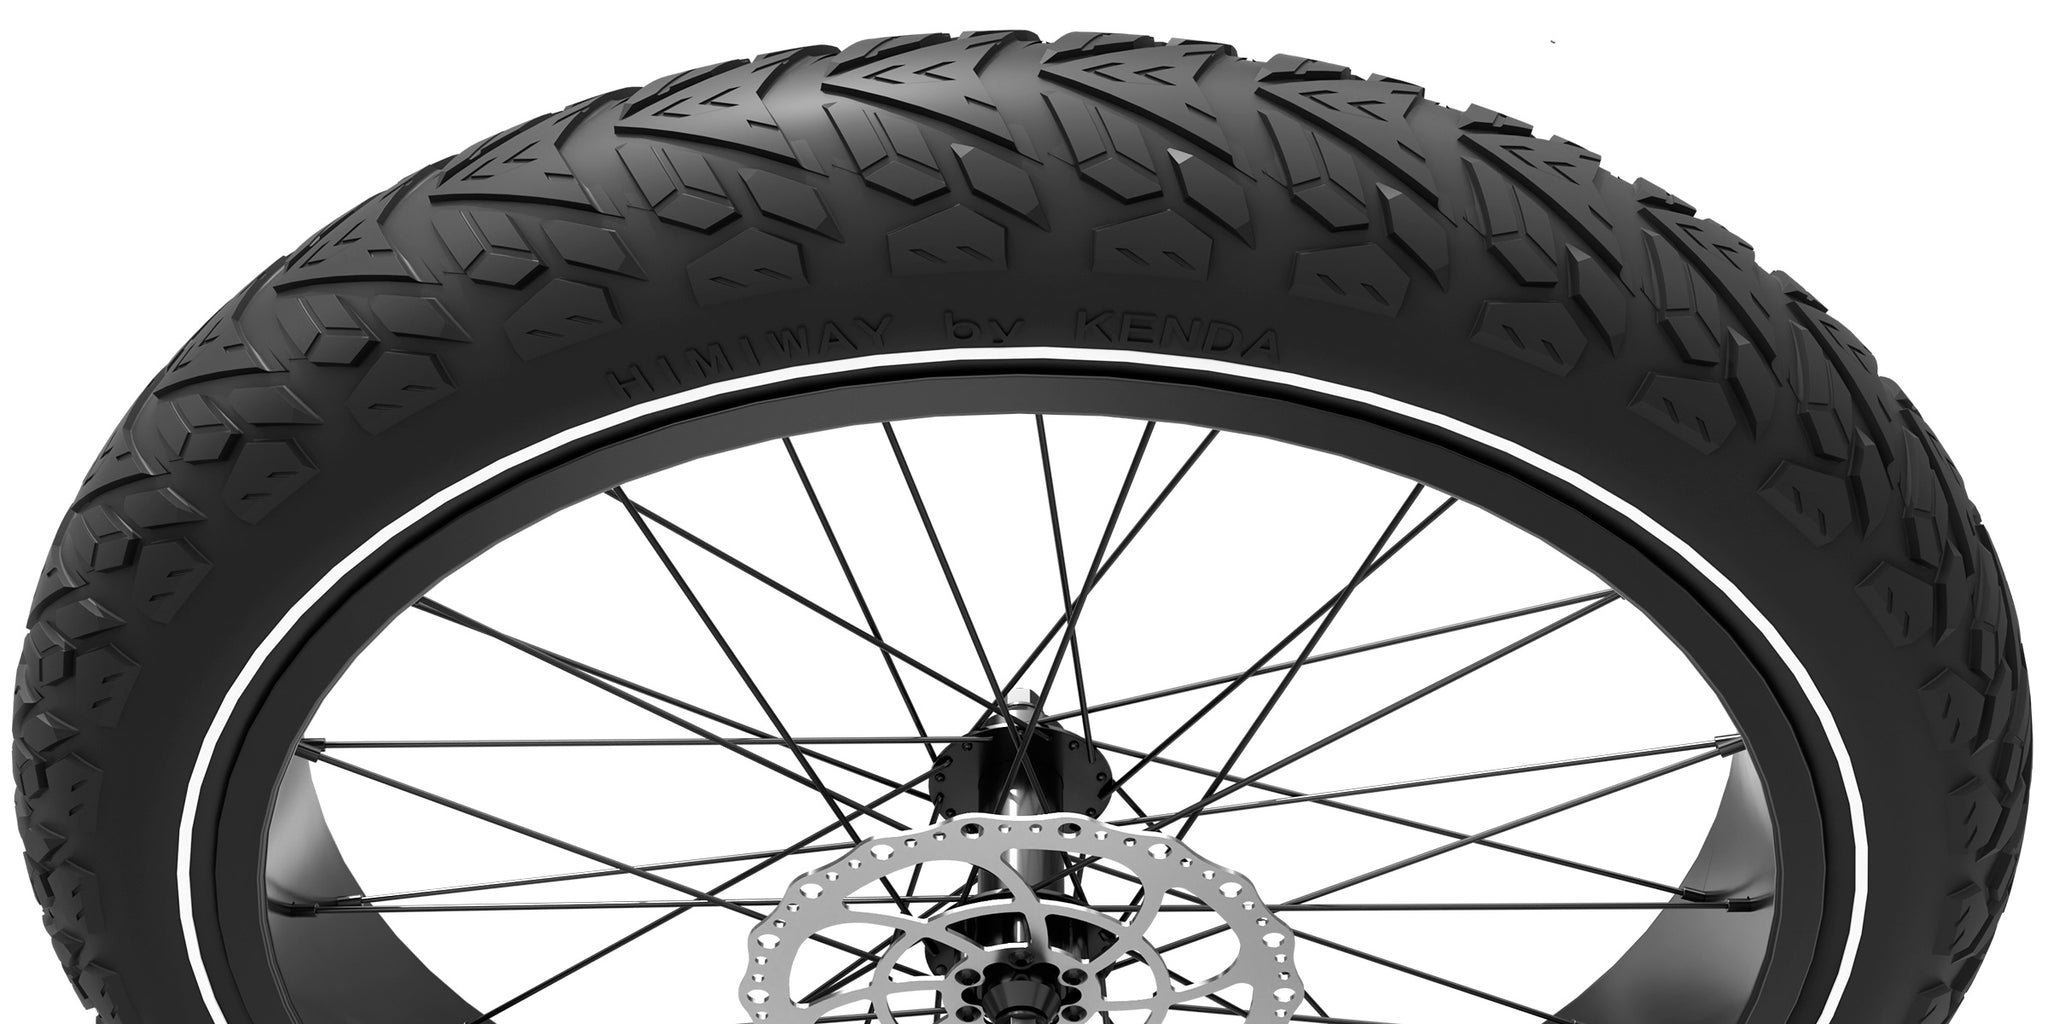 The CST 26"X4.5" Fat Tire